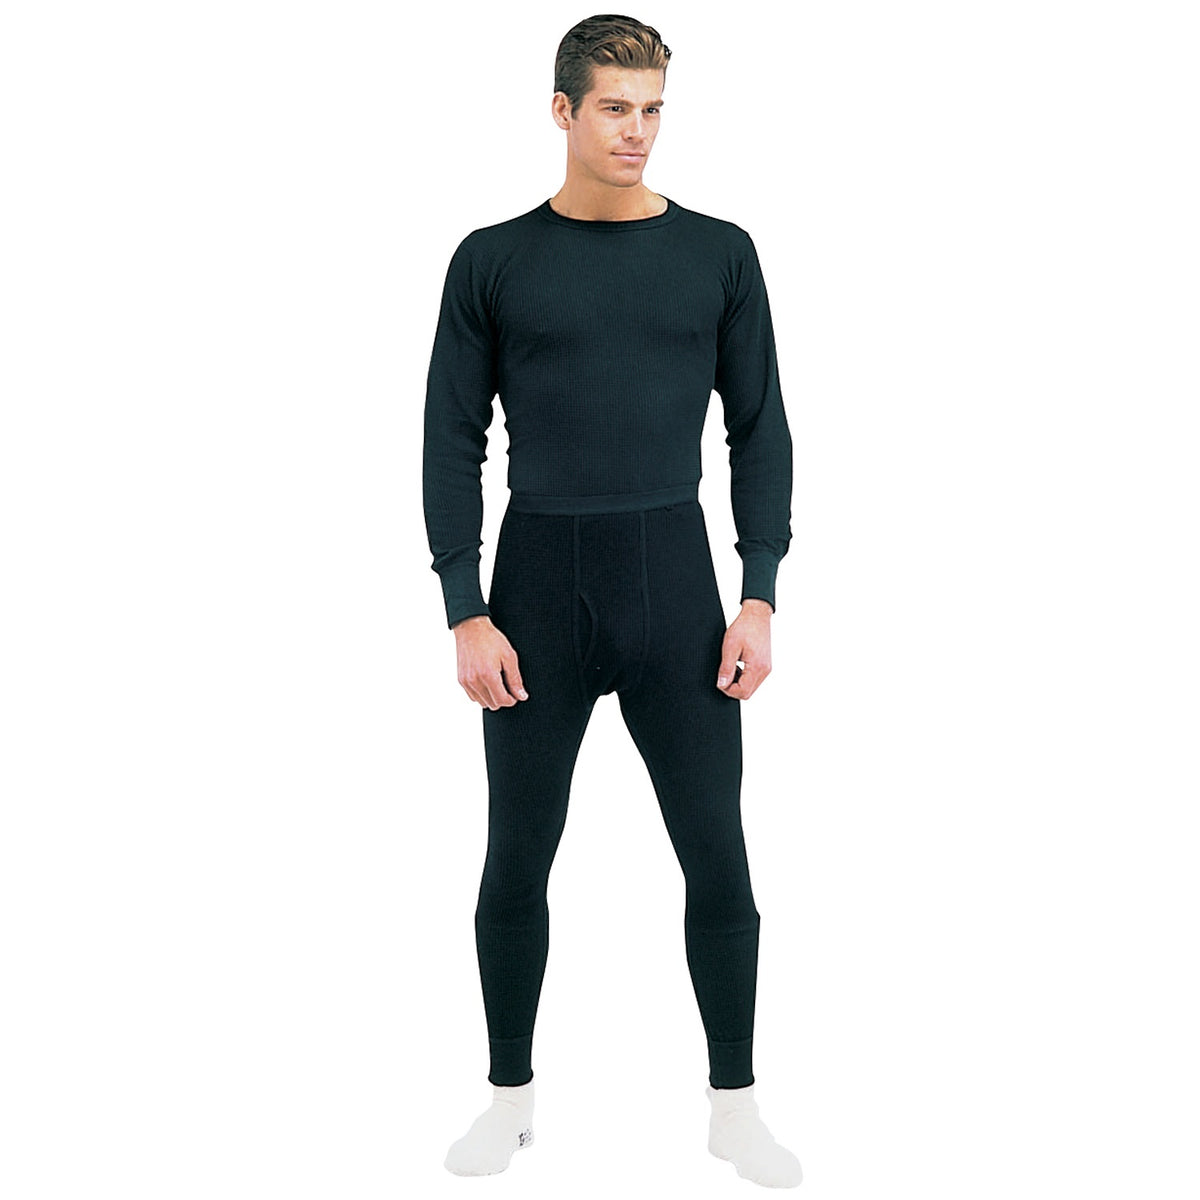 Rothco Thermal Knit Underwear Top Black